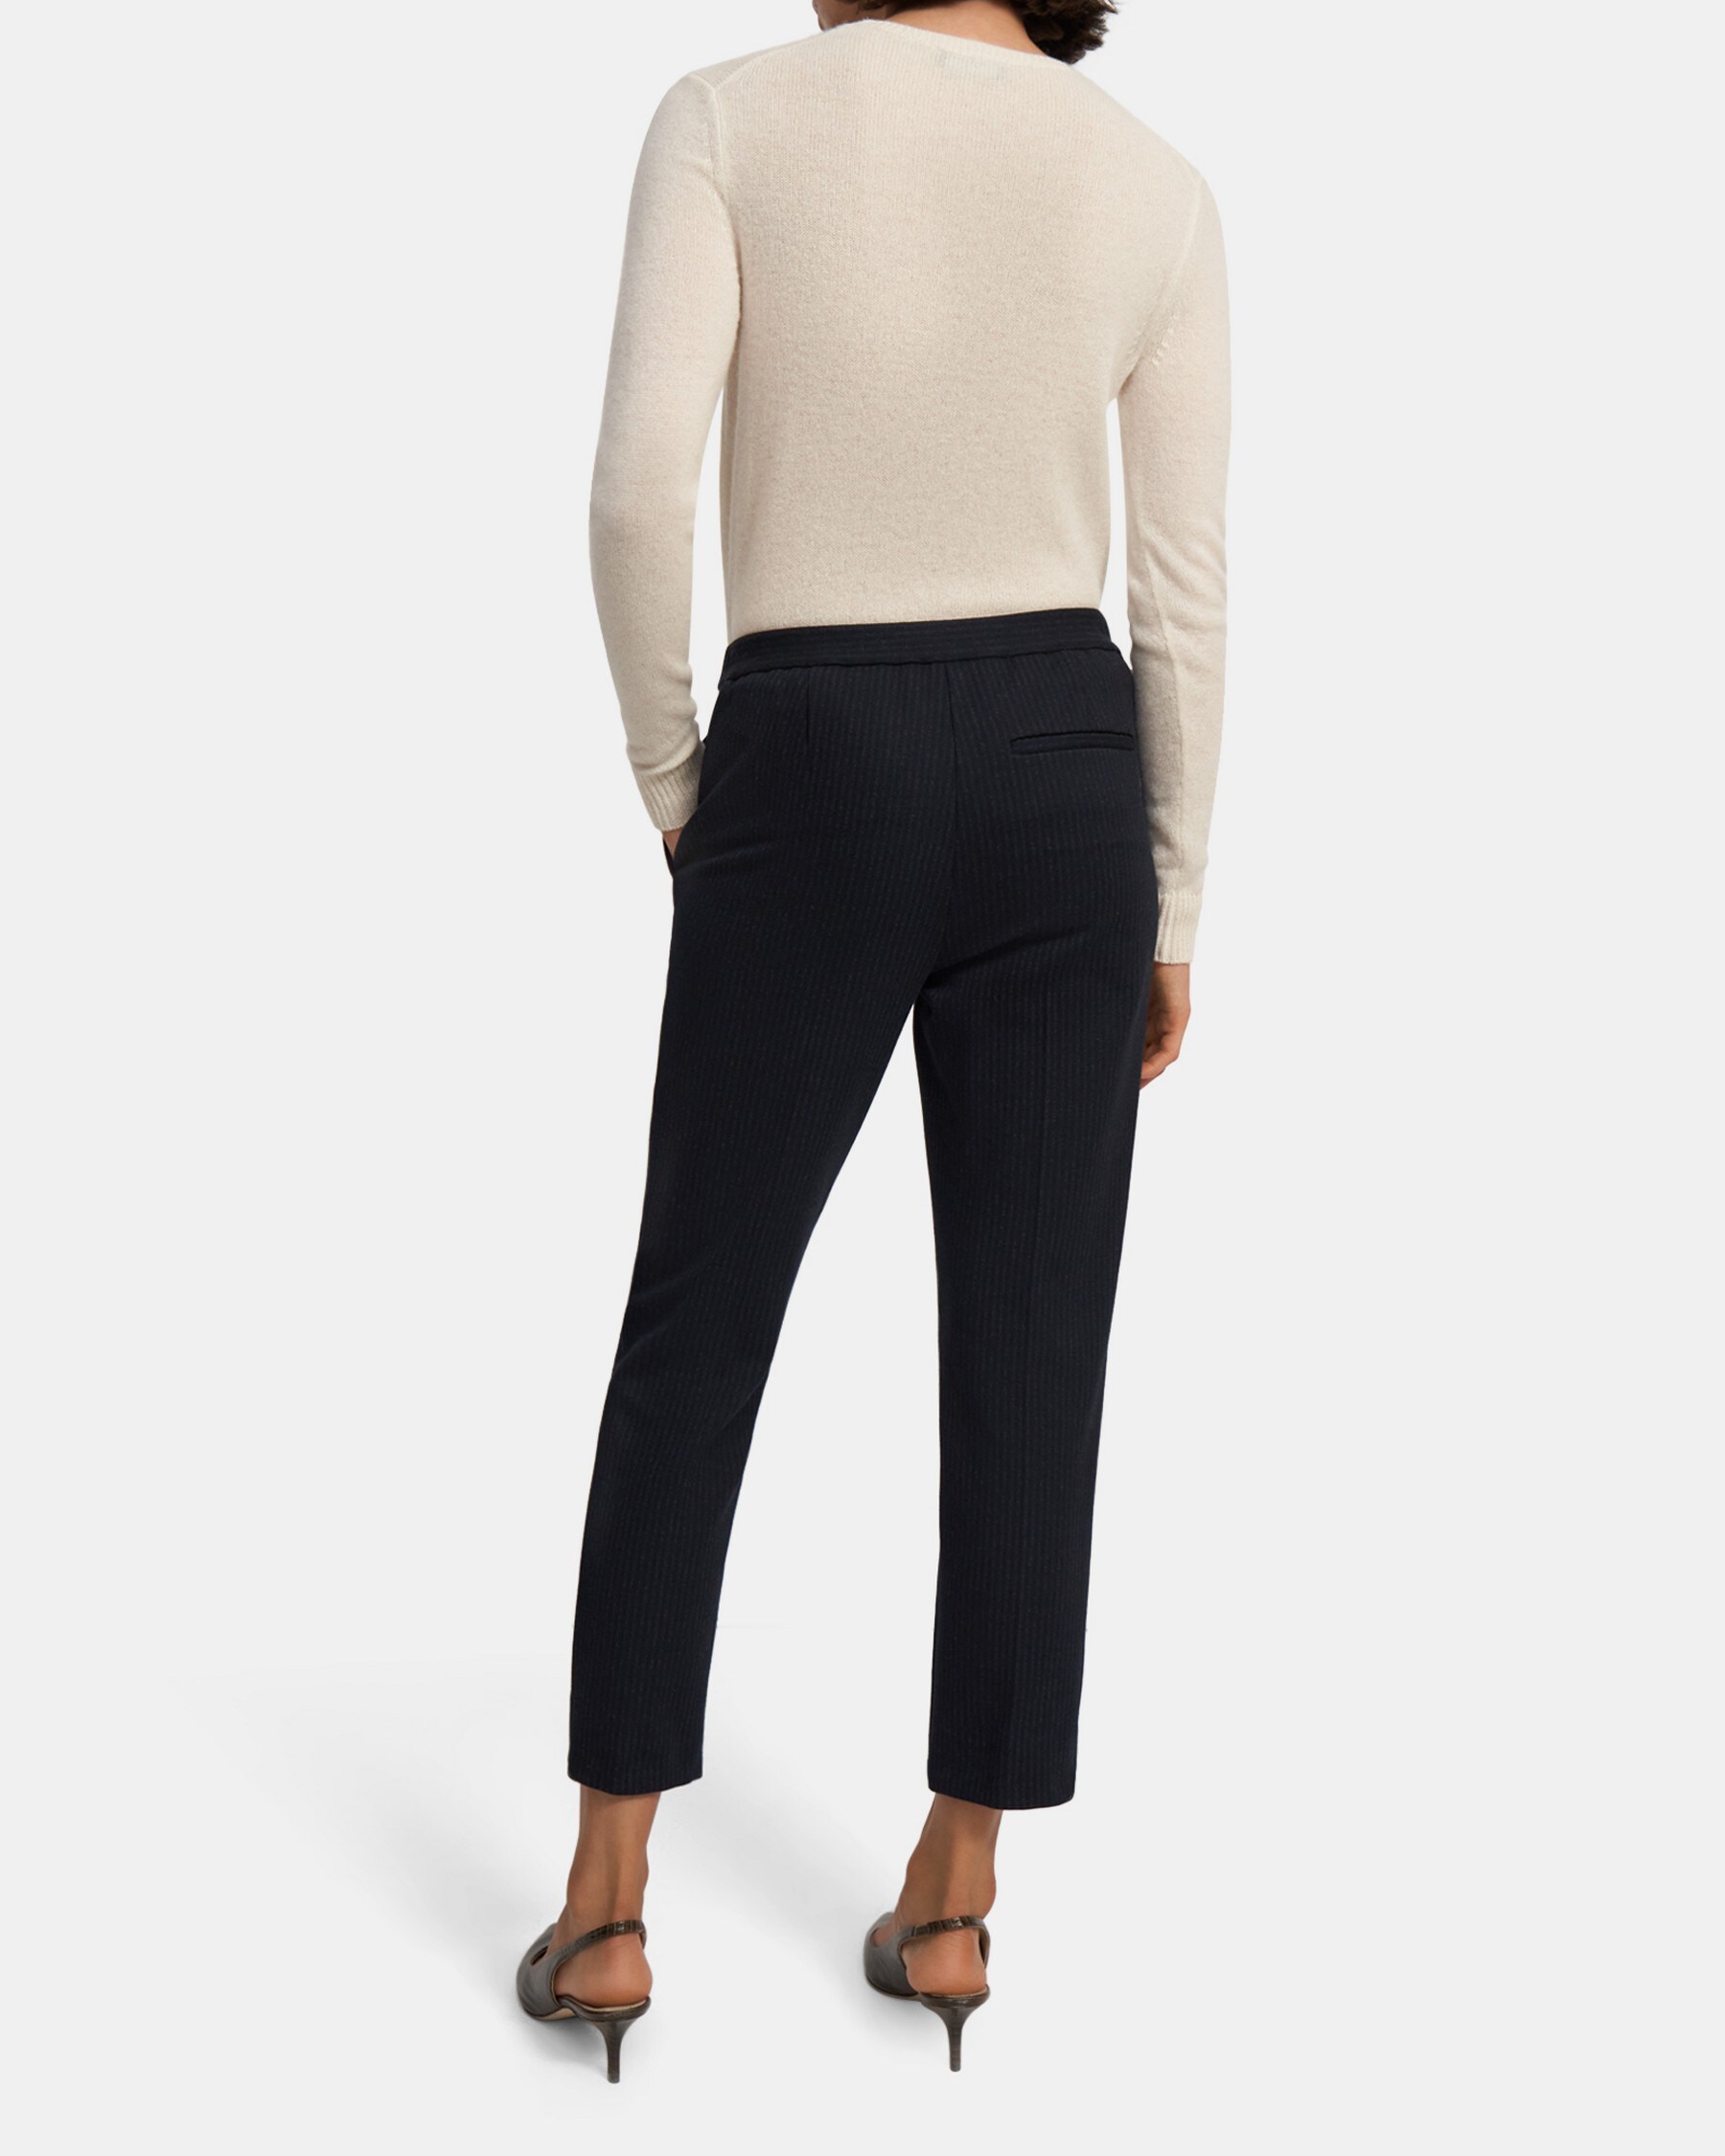 Slim Cropped Pull-On Pant in Striped Viscose Knit